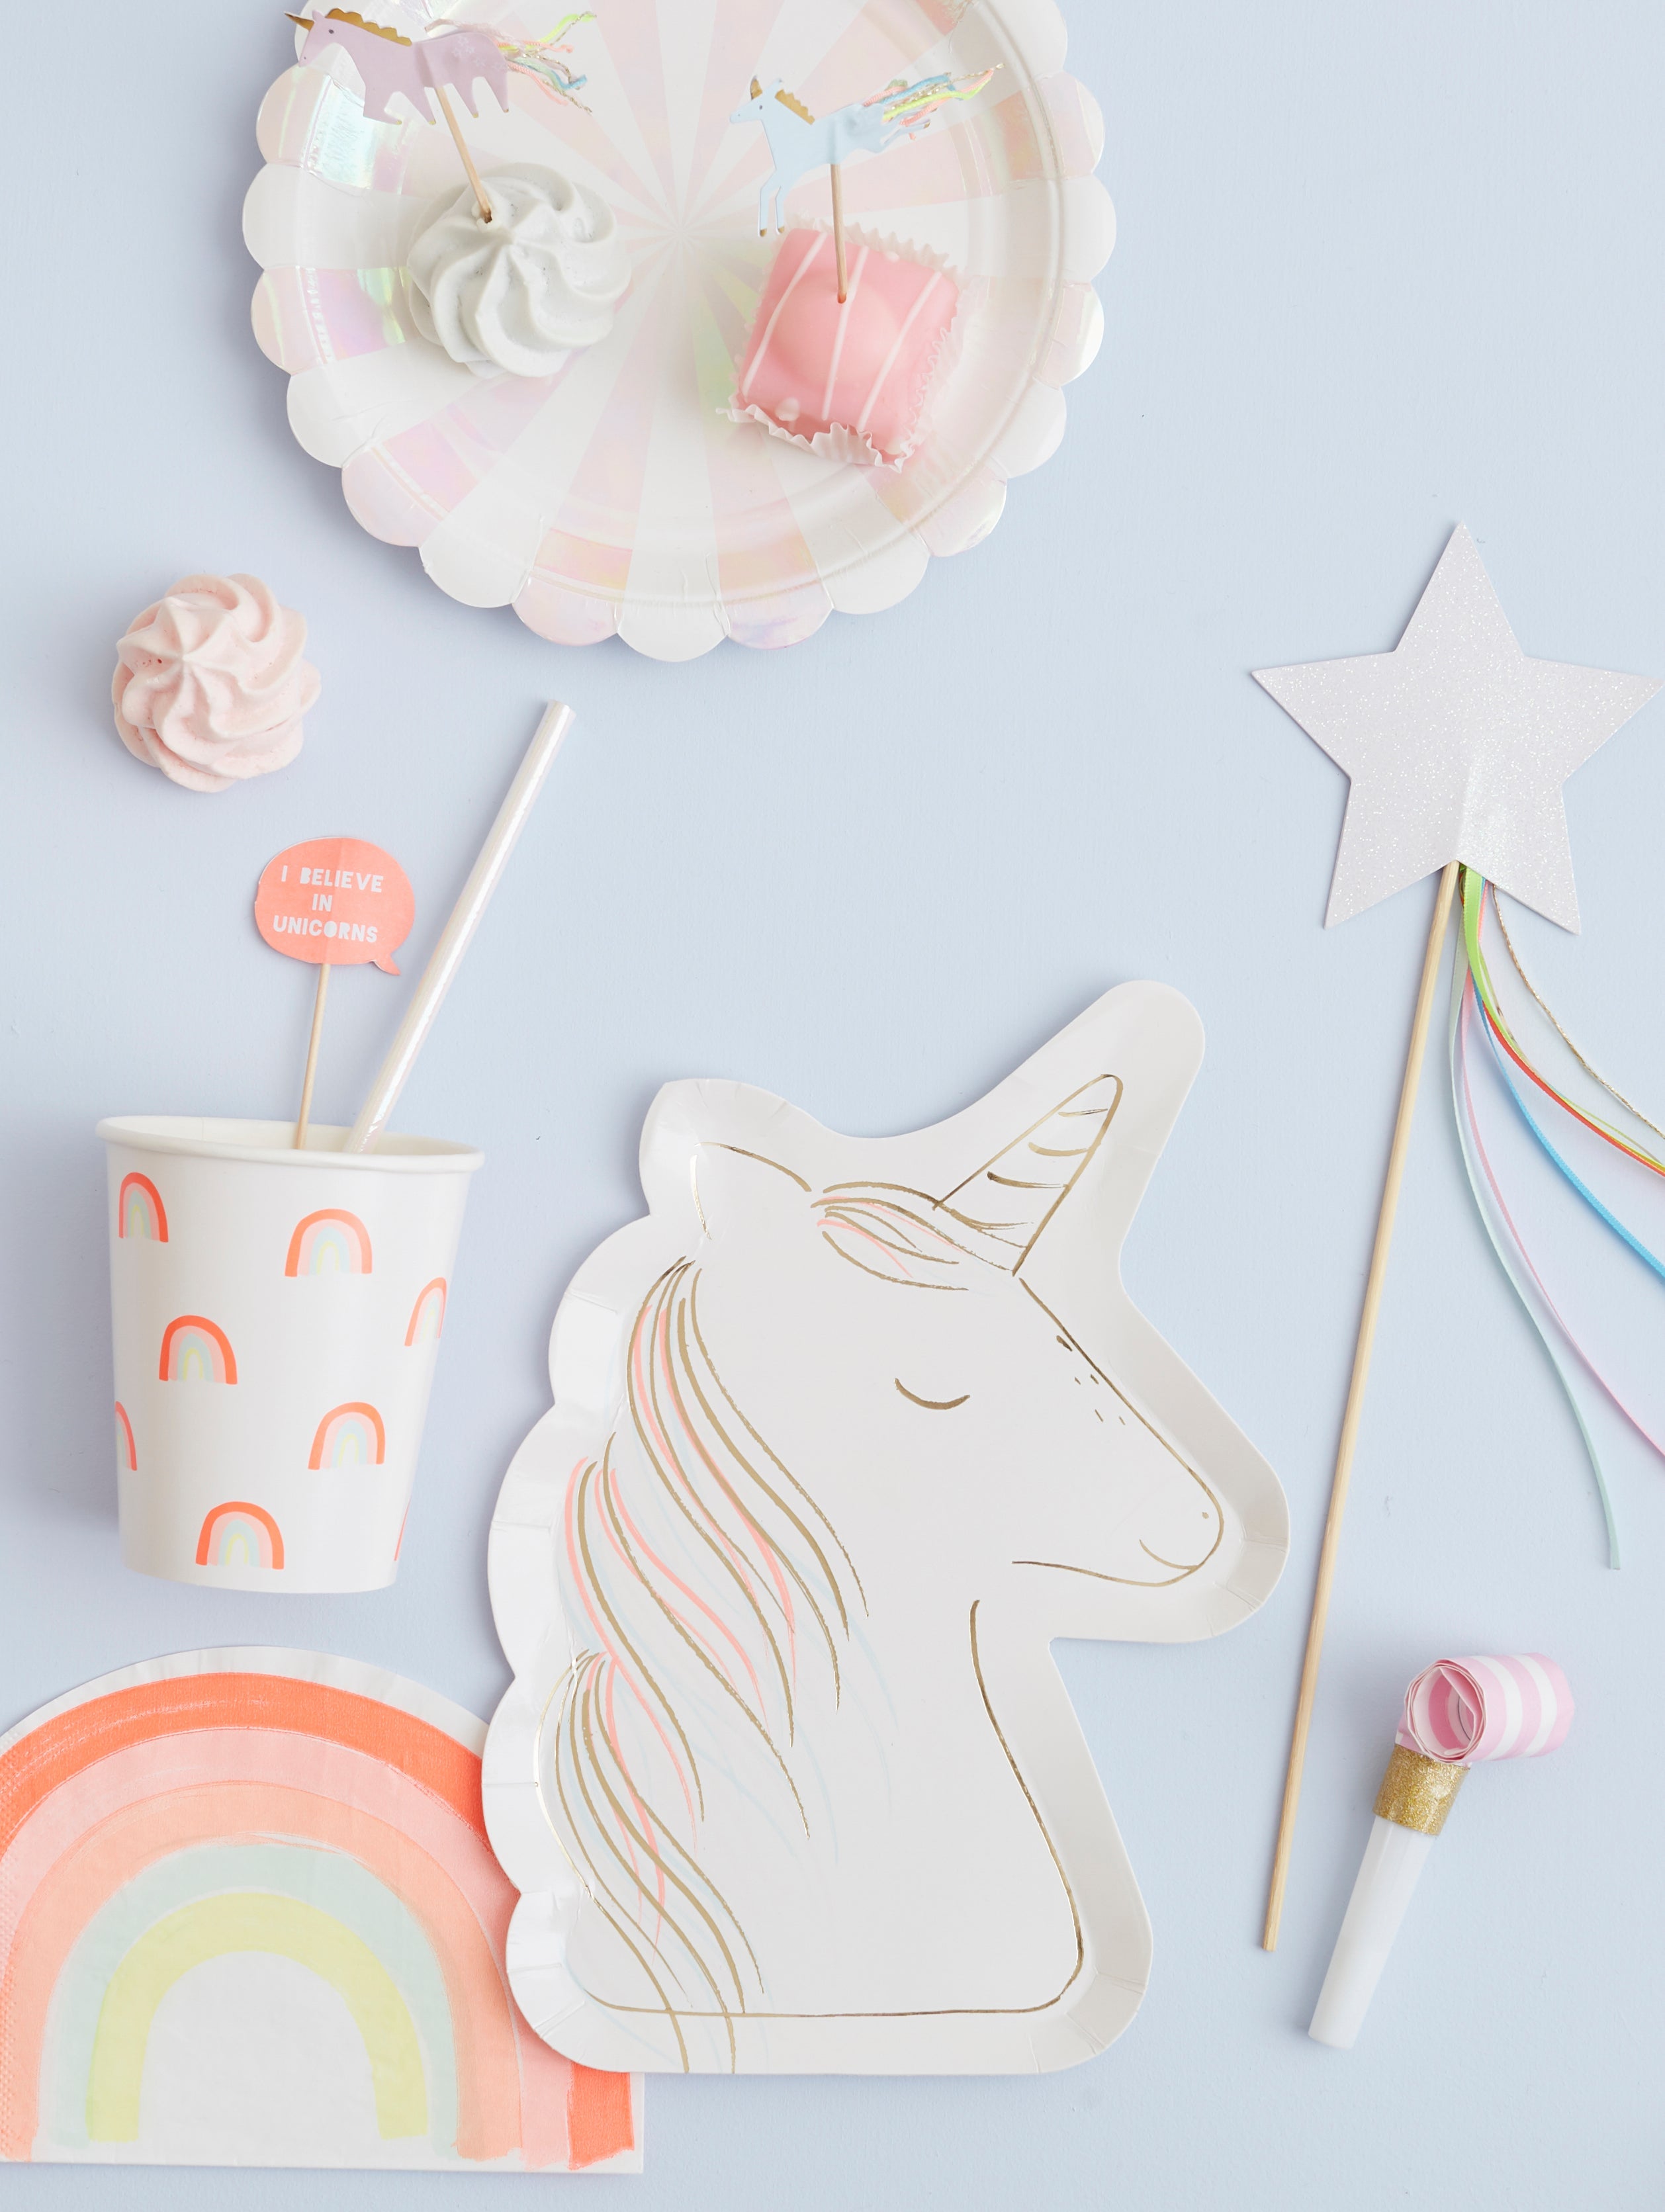 The unicorn shaped party plates, napkins, and candles are stunning and will take your unicorn theme to the next level. Your guests will be feeling the magic all day!